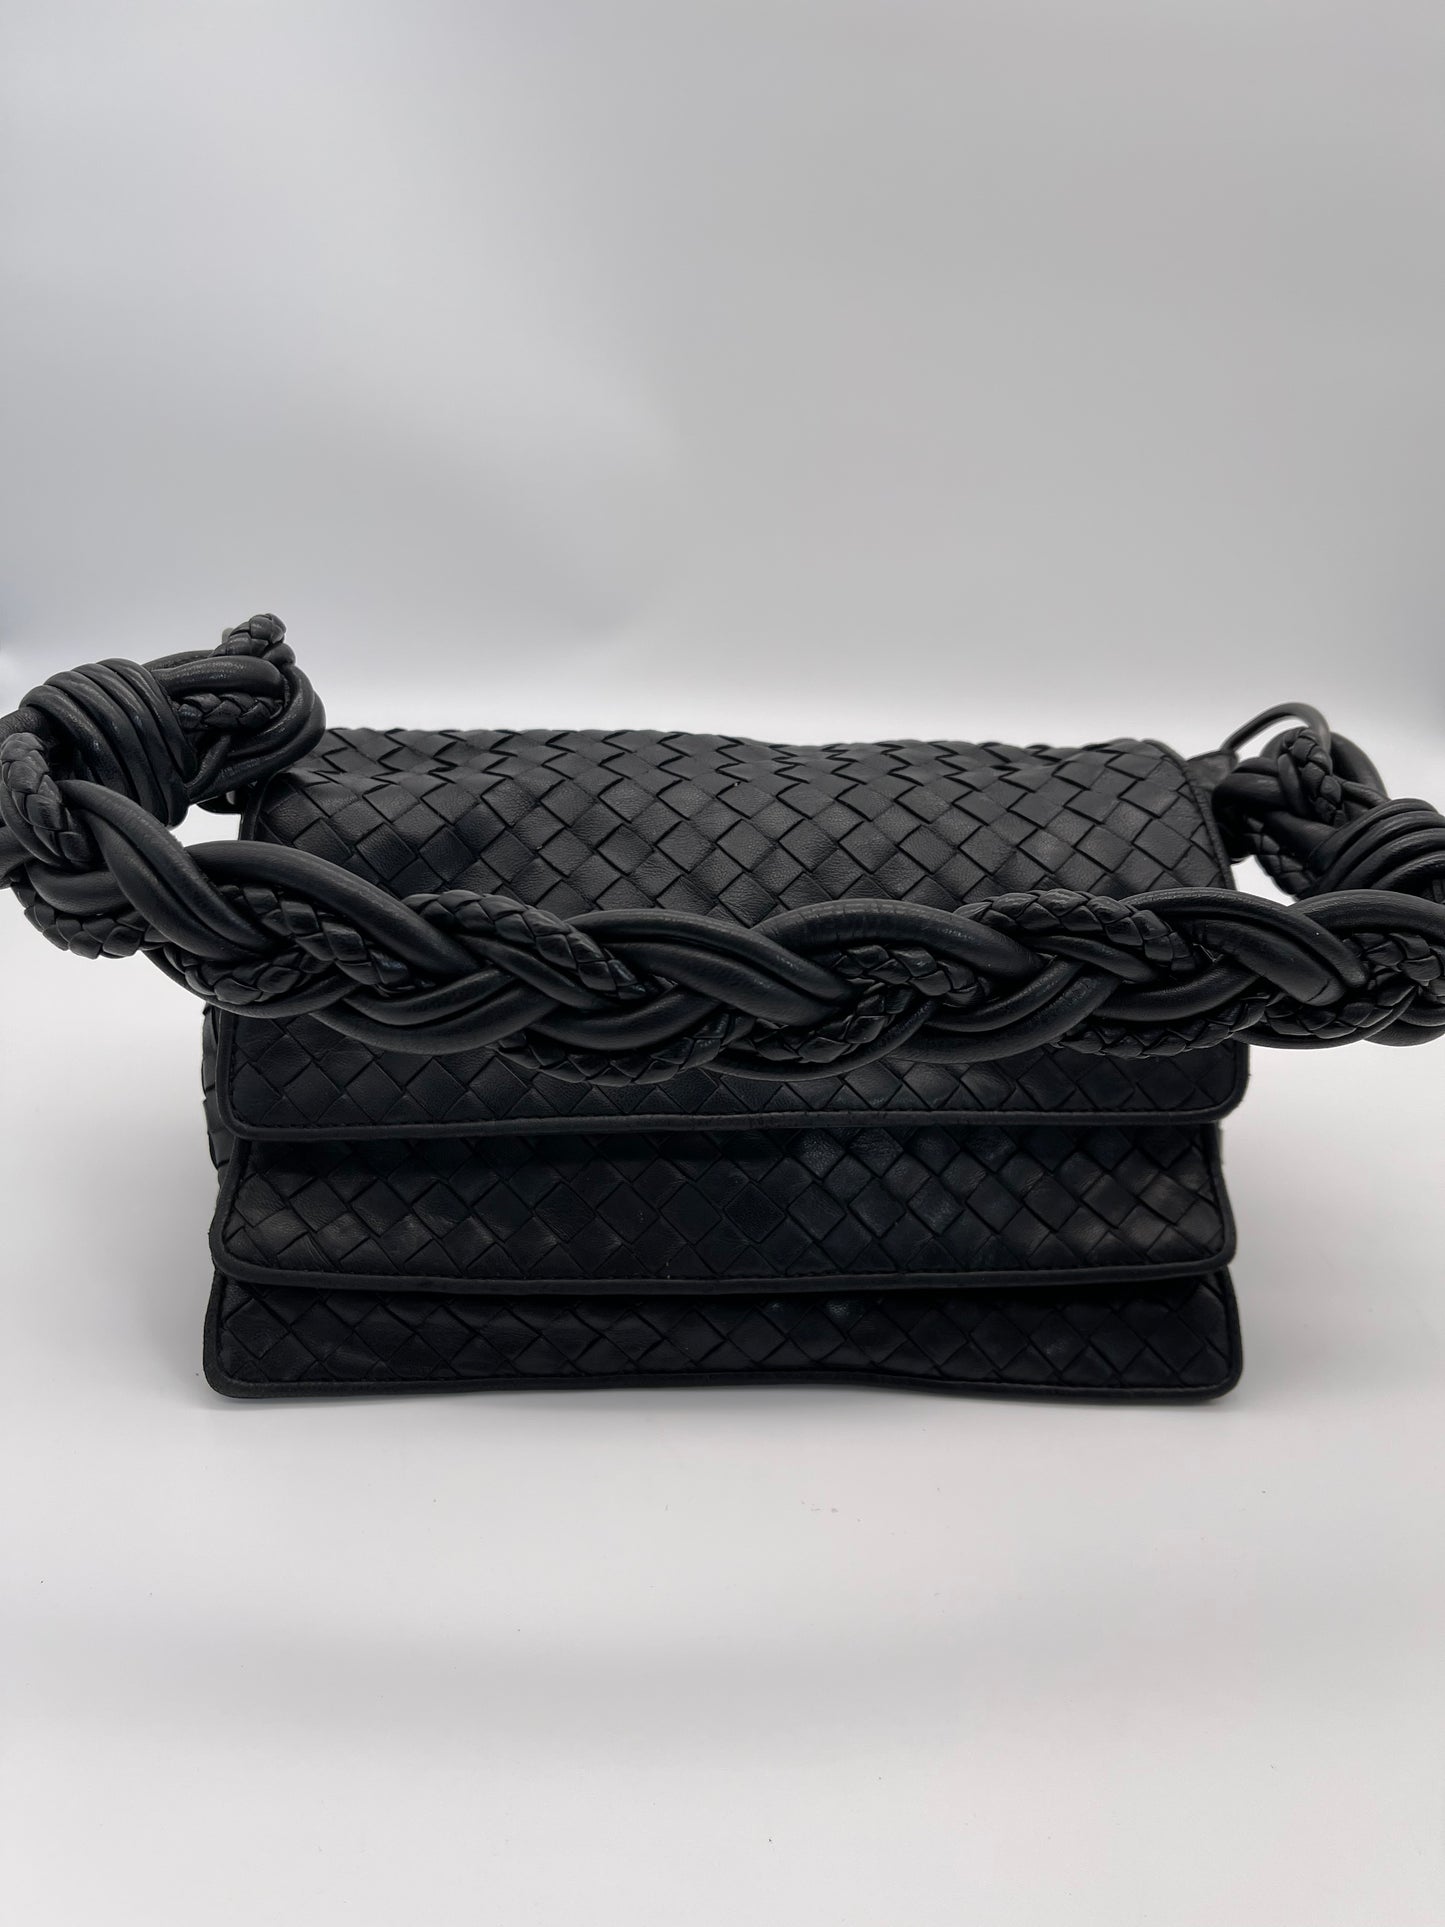 Convertible Shoulder Bag With Braided Handle